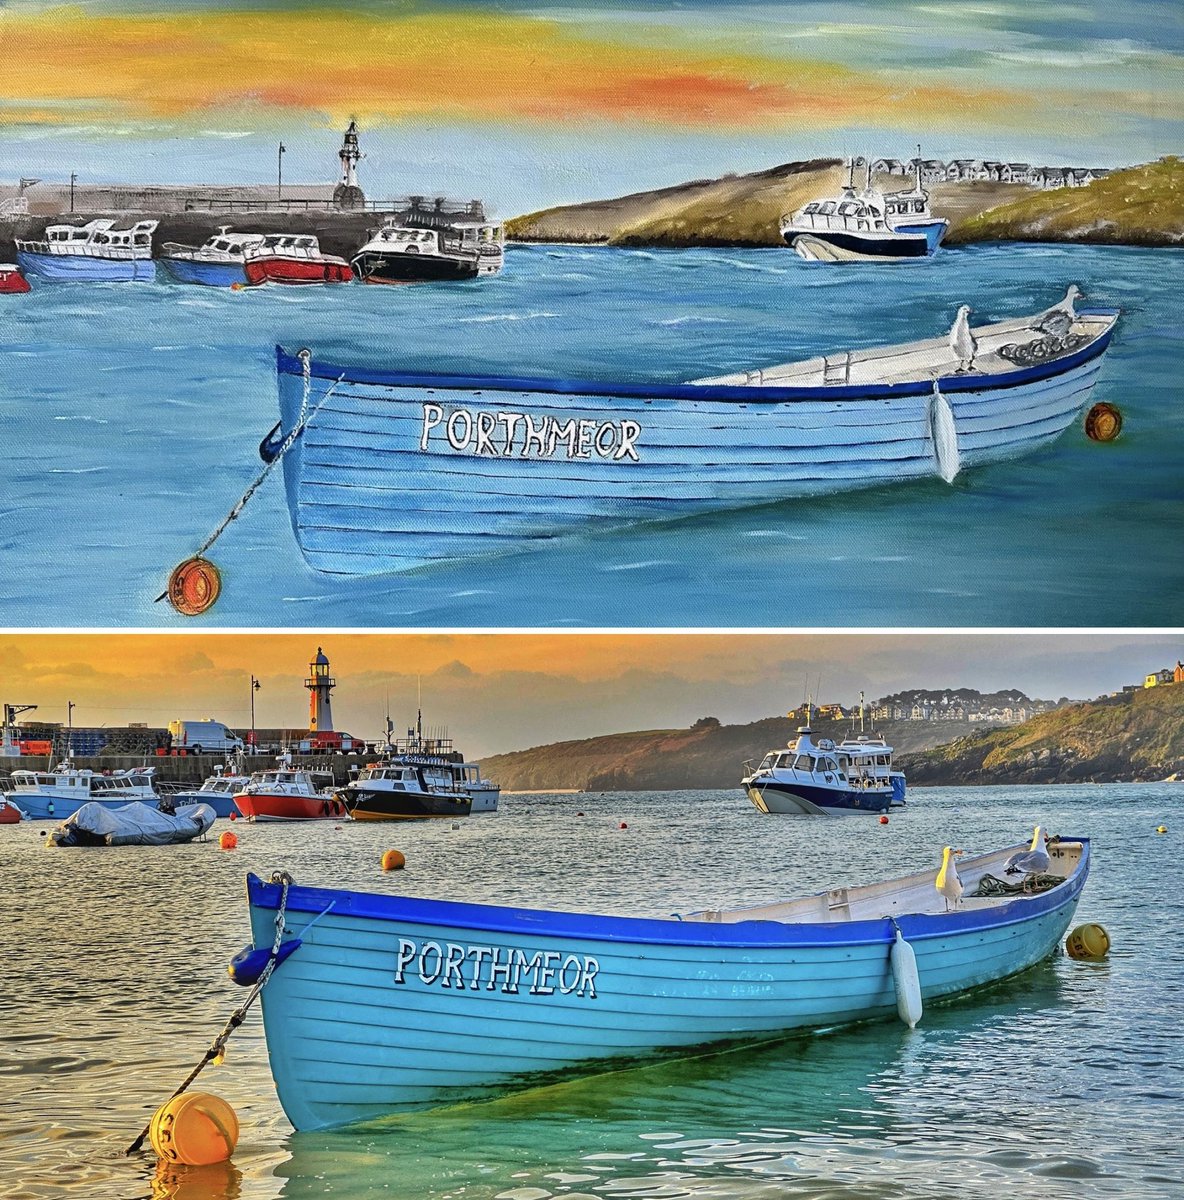 When someone asks to paint one of your photos and this happens! ♥️ #cornwall #kernow #lovecornwall #uk #explorecornwall #cornishcoast #sea #ocean #stives #stivescornwall #sky #sunrise #quay #dawn #spring #harbour #boat #gig #art #painting #talent #artist @beauty_cornwall